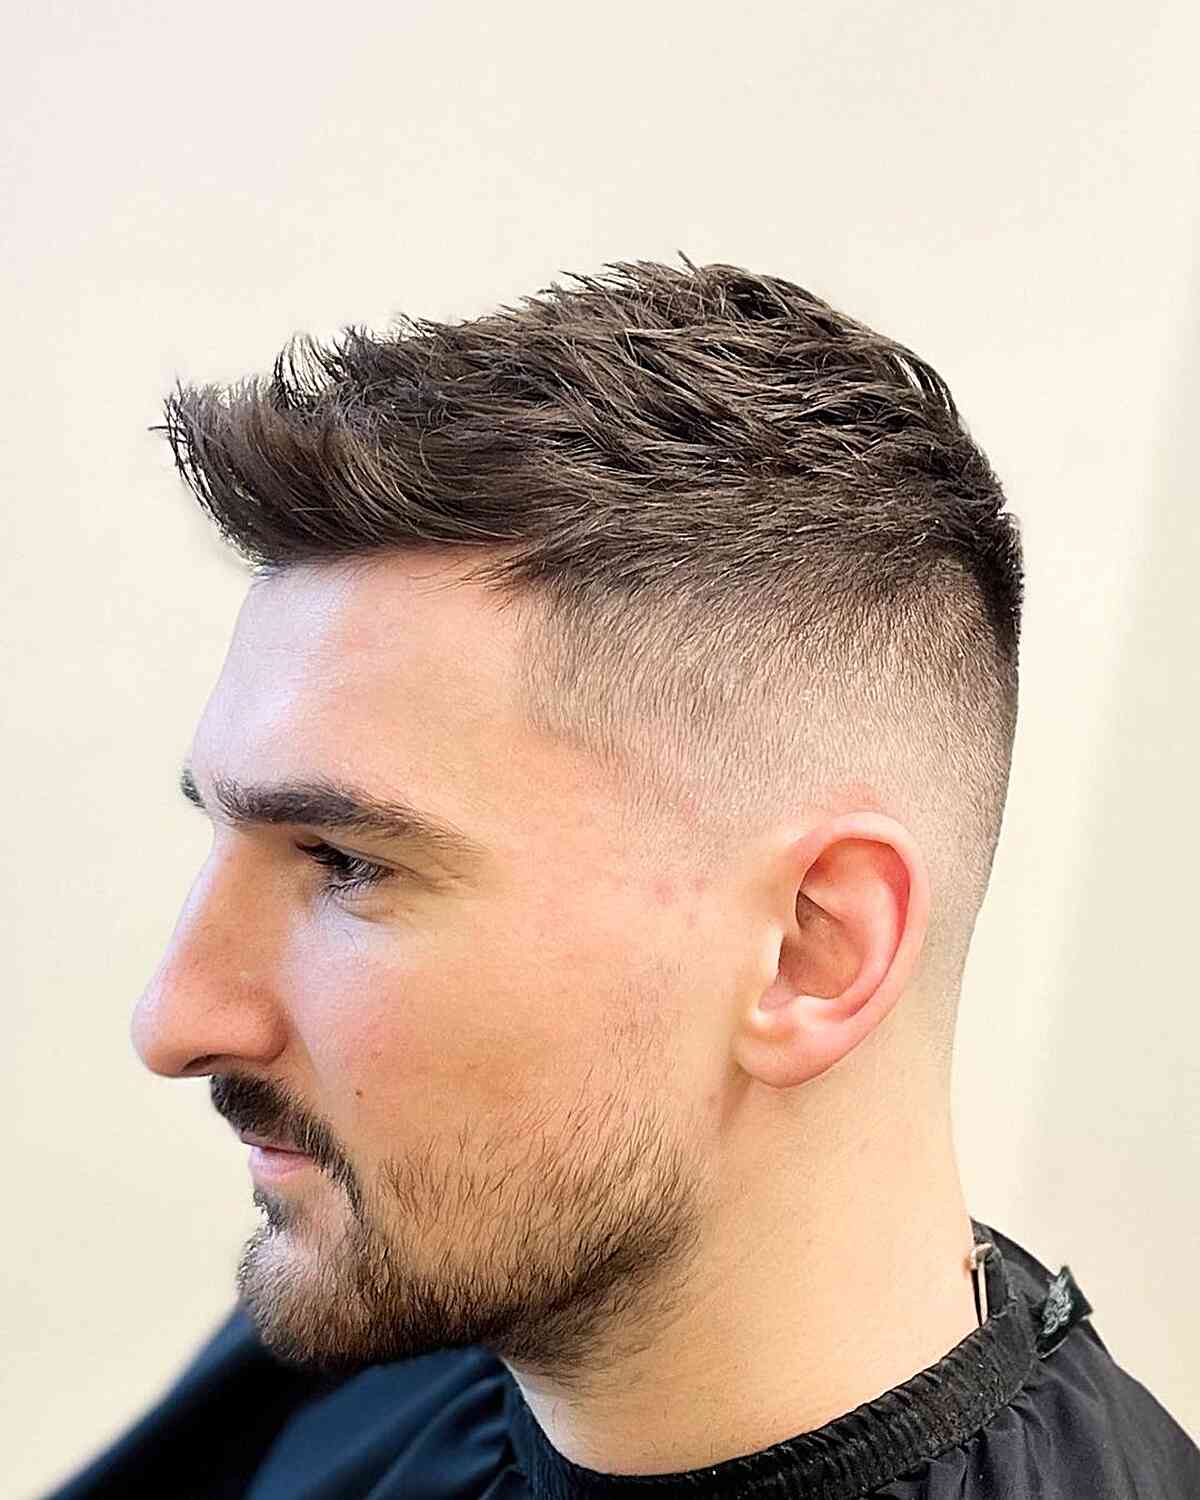 Spiked Crew Cut with Shaved Sides and Nape on Fine Hair